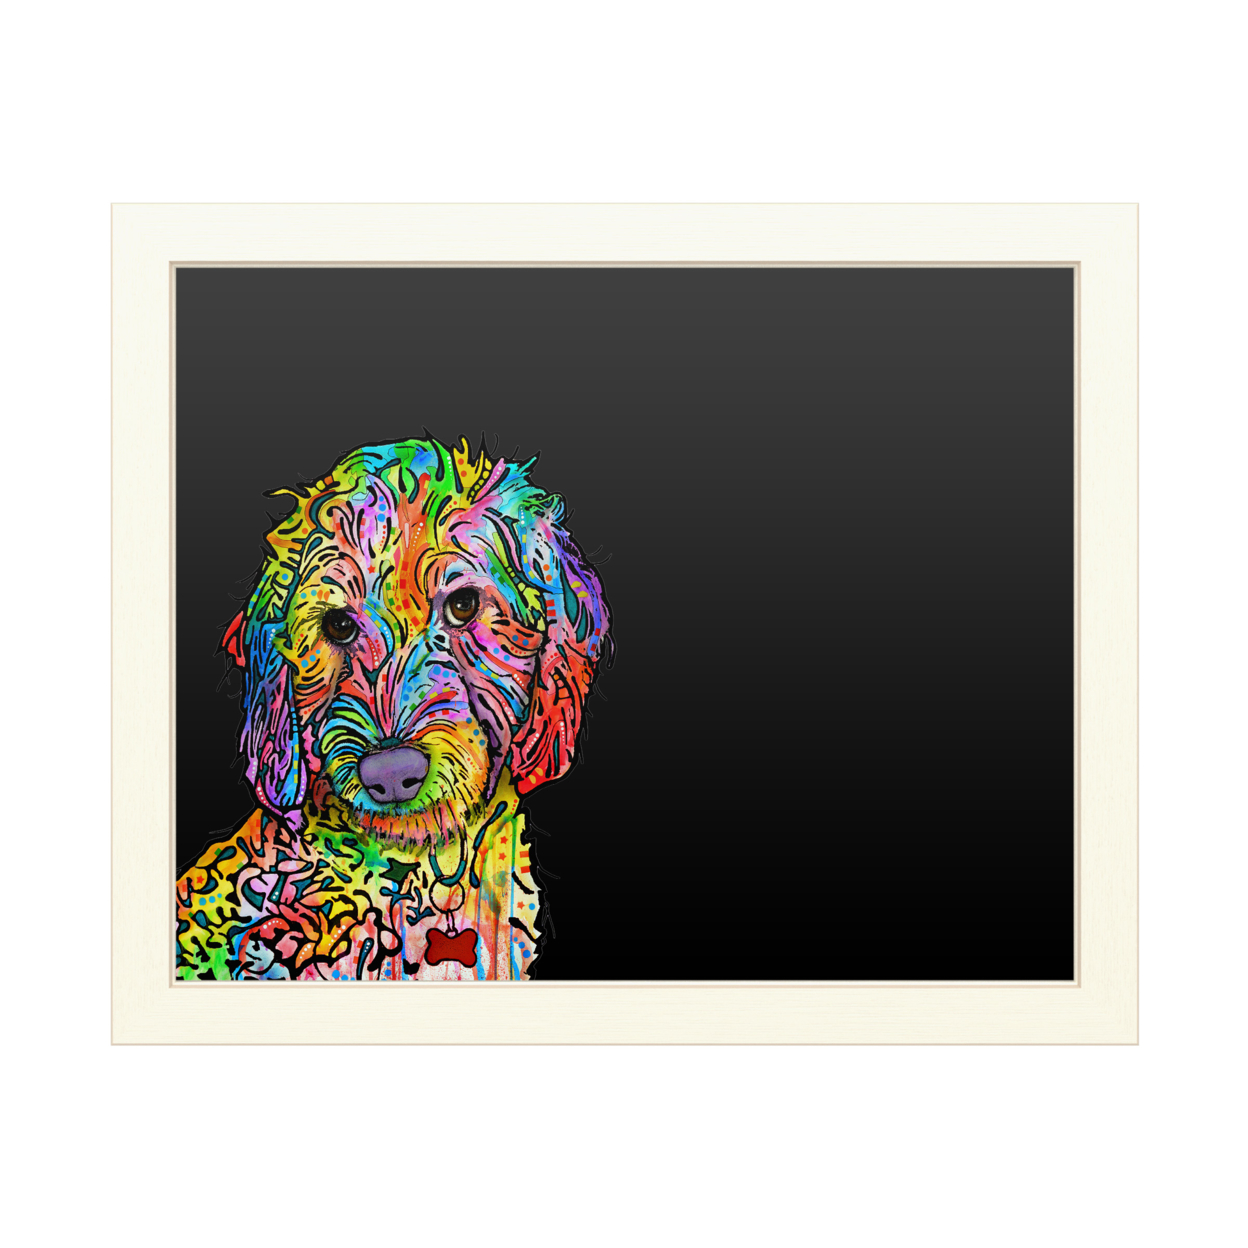 16 X 20 Chalk Board With Printed Artwork - Dean Russo Sweet Poodle White Board - Ready To Hang Chalkboard